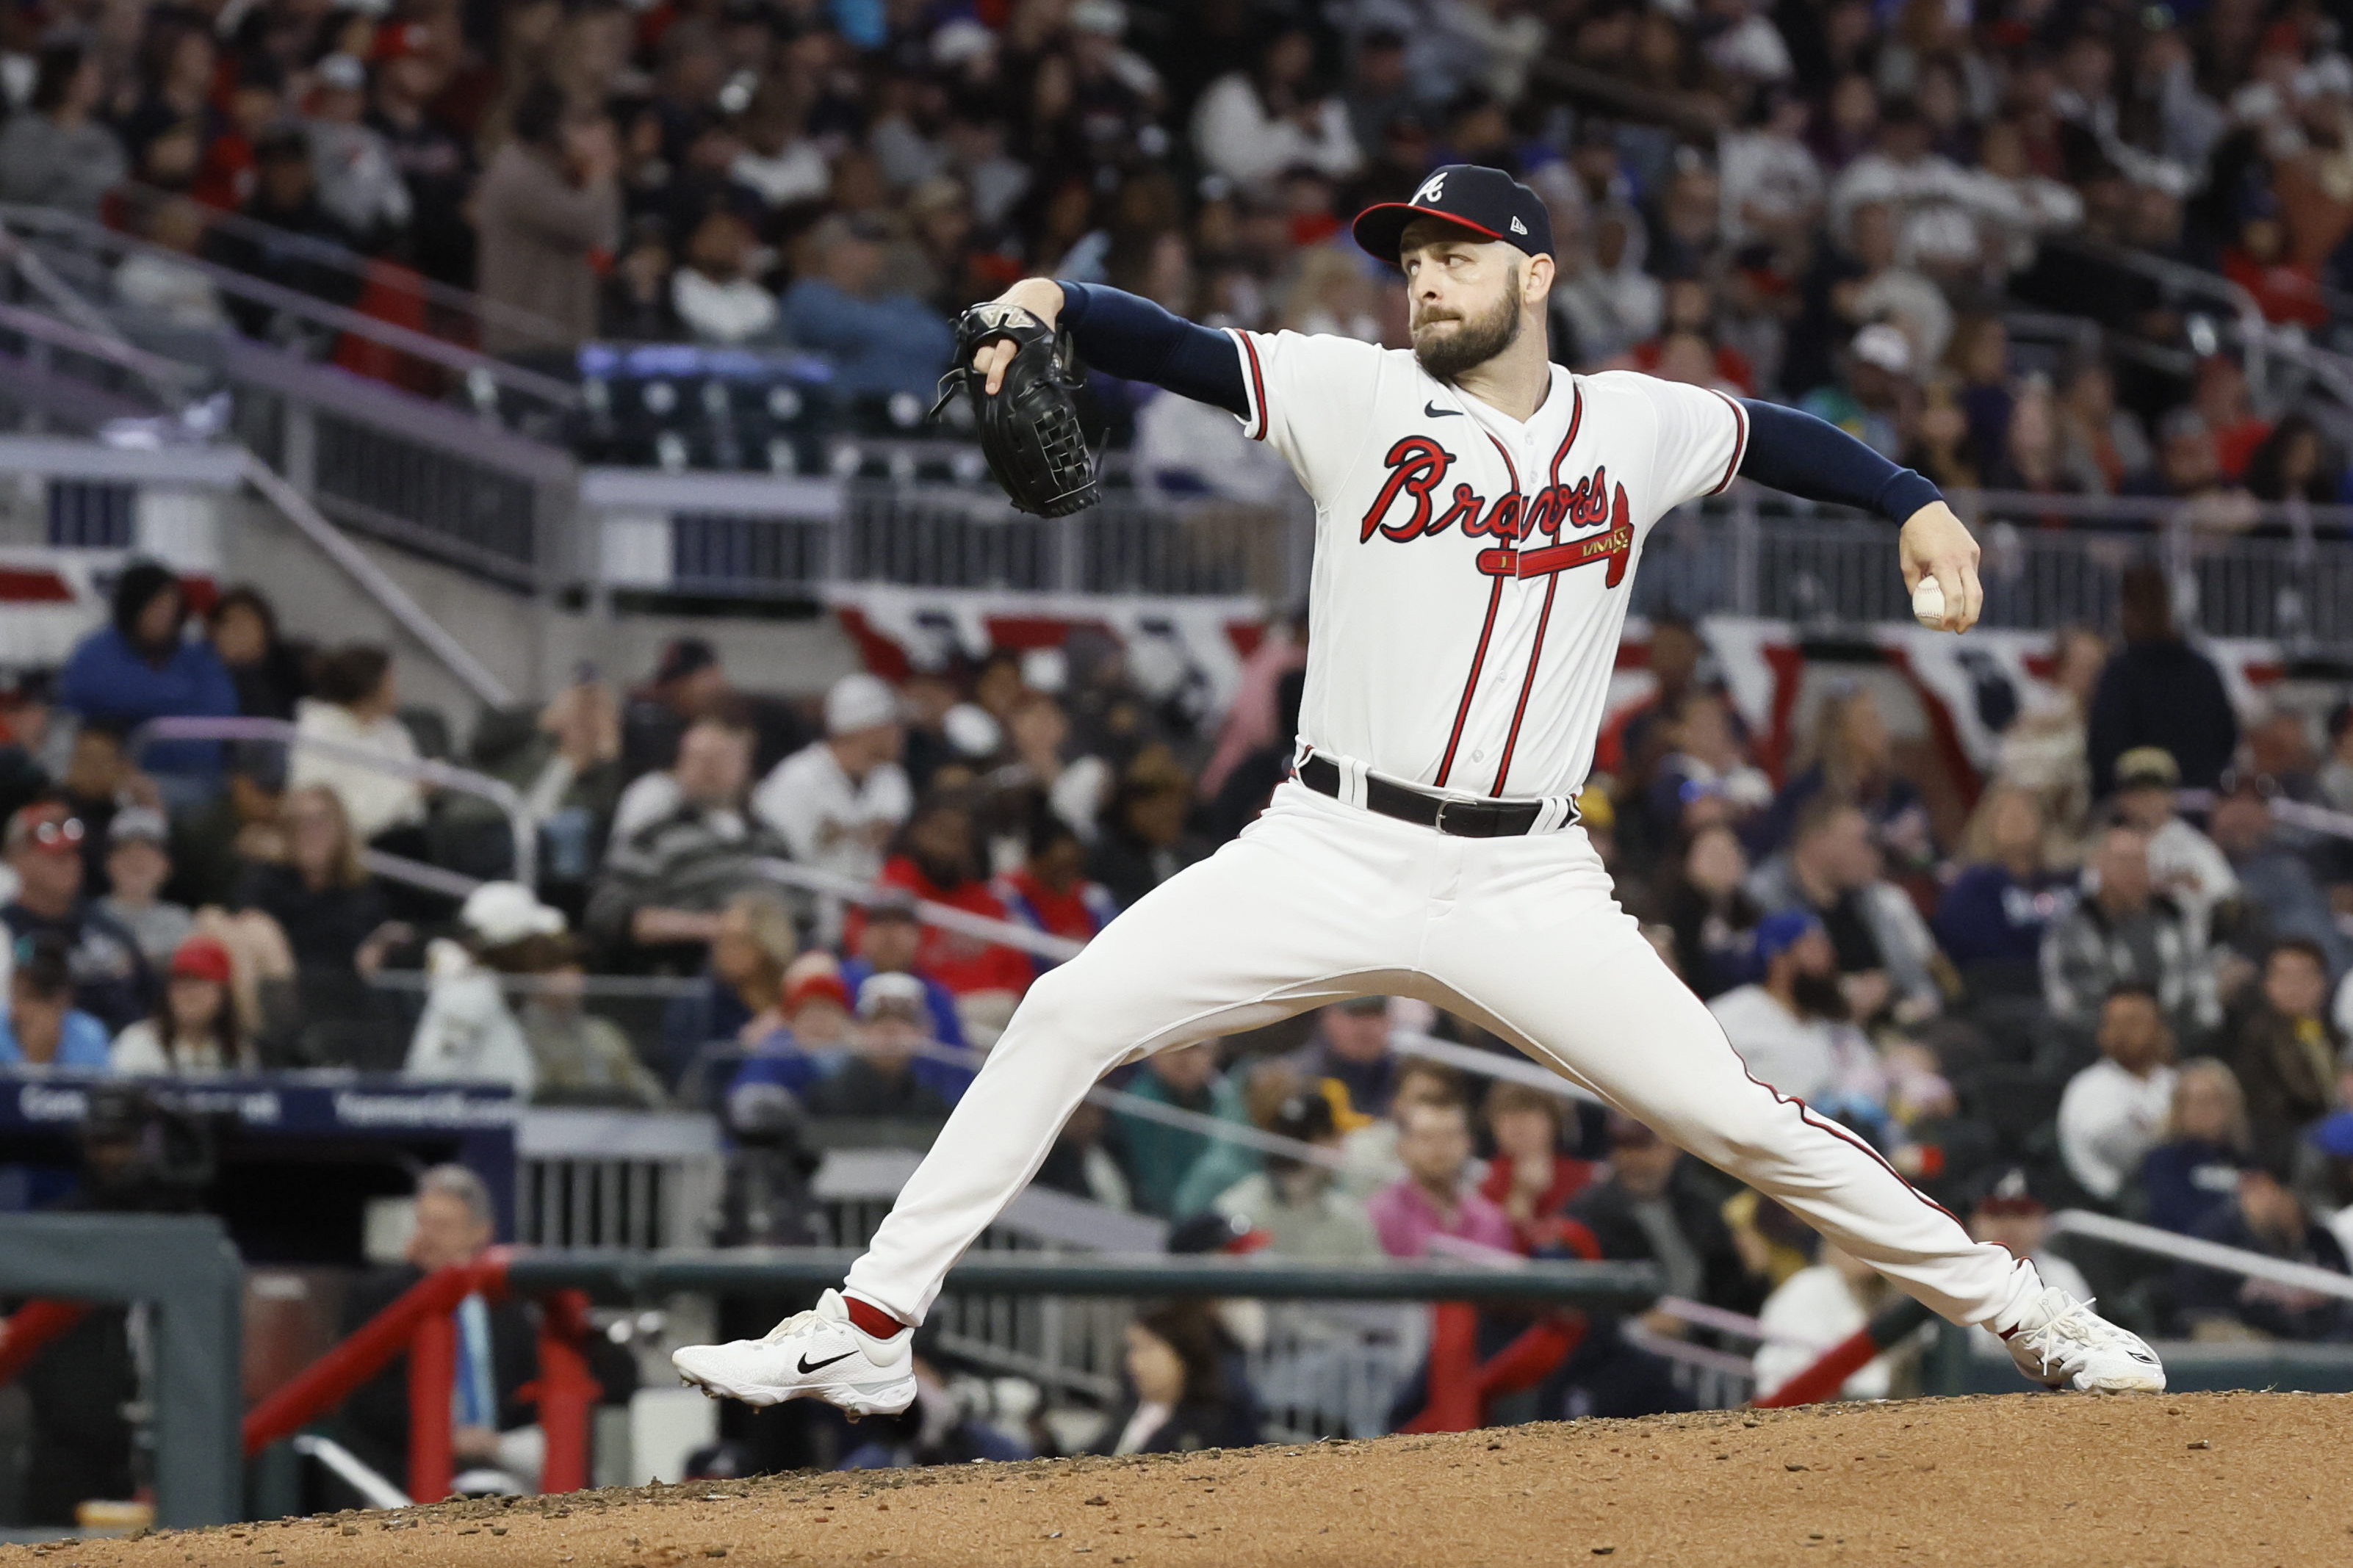 Braves News: SP Max Fried Activated Off Injured List After Three